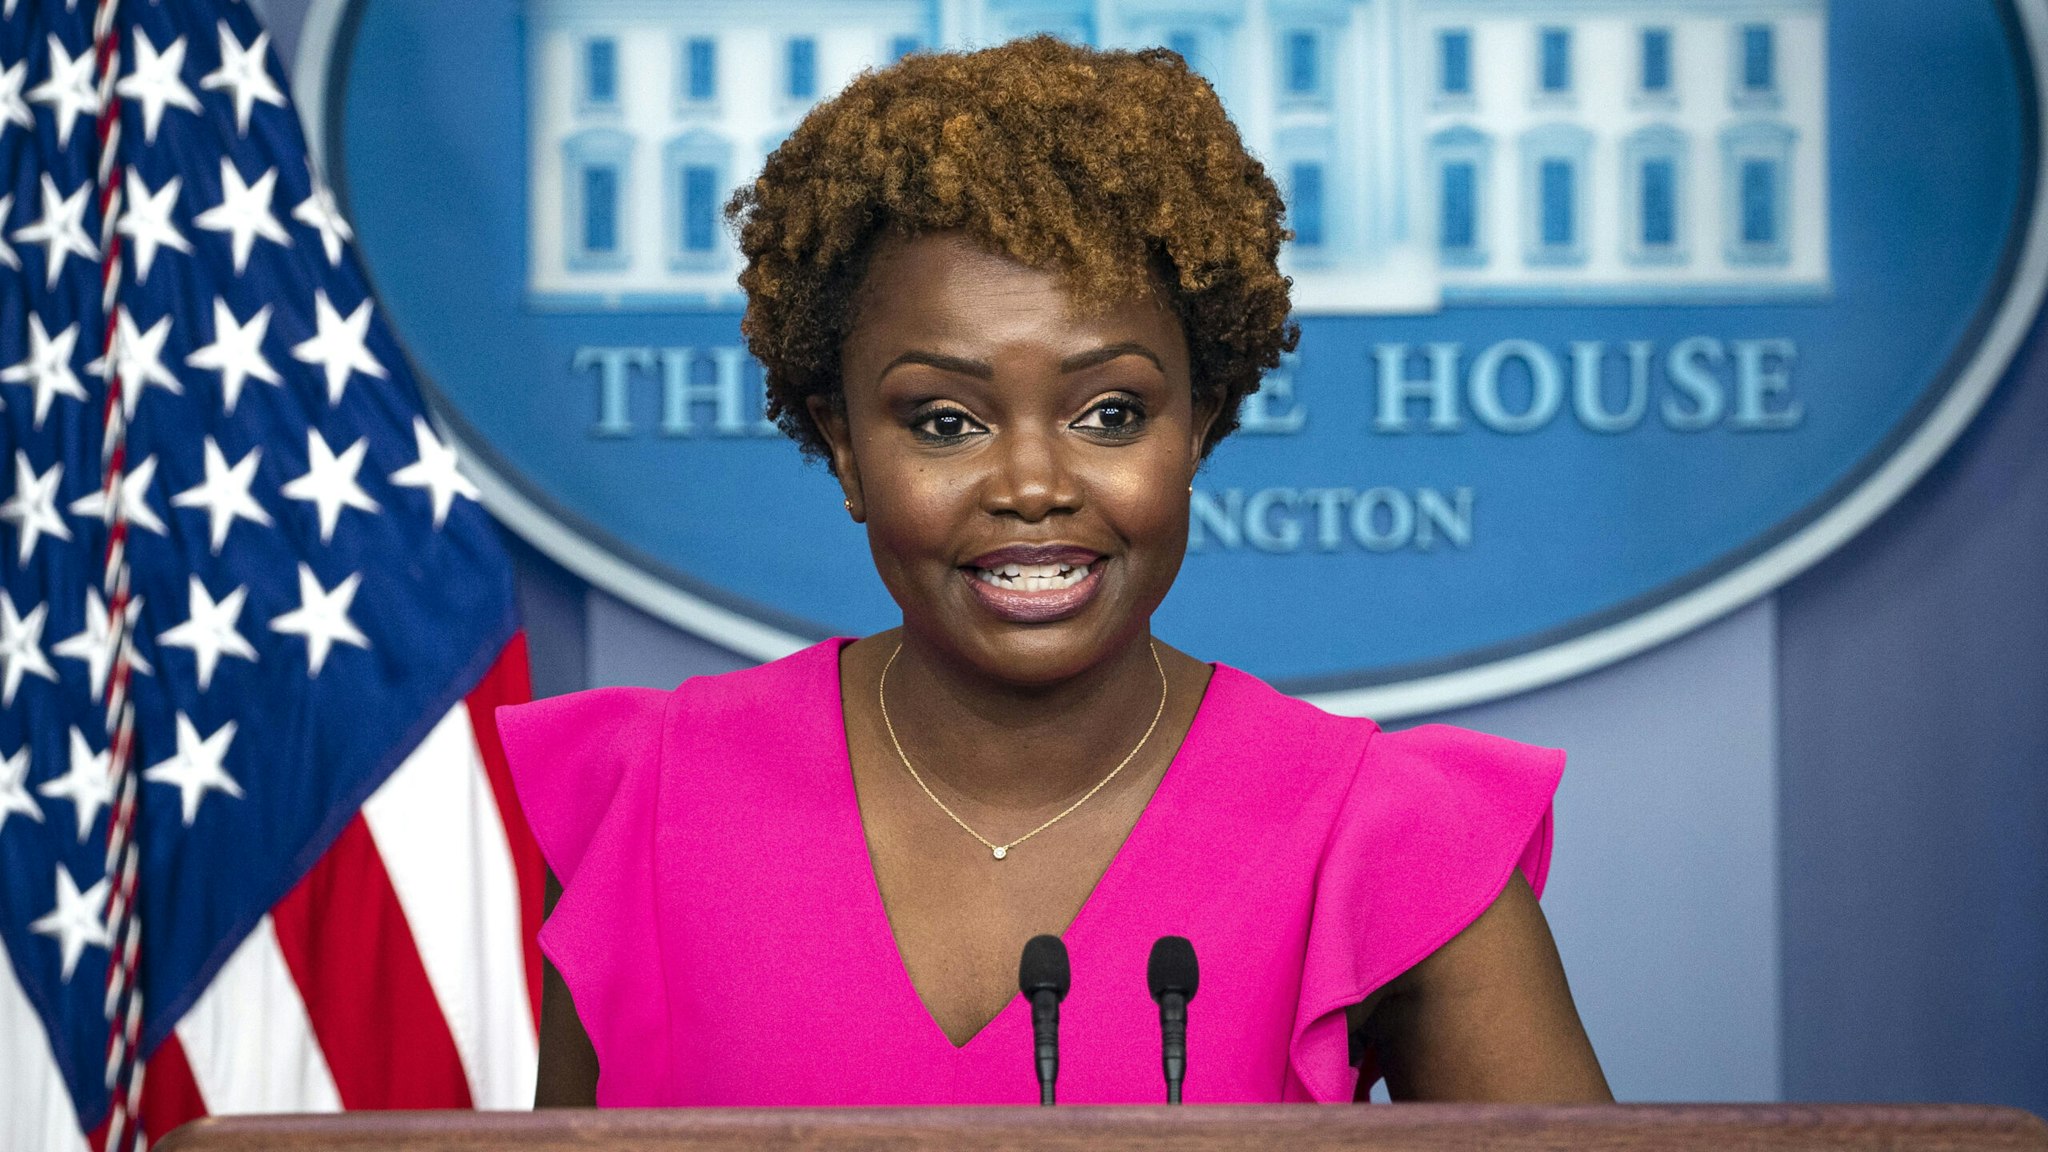 Karine Jean-Pierre, principal deputy press secretary, speaks during a news conference in the James S. Brady Press Briefing Room at the White House in Washington, D.C., U.S., on Thursday, Dec. 16, 2021. The Biden administration is preparing to impose more stringent limits on car and truck emissions in an effort to clamp down on a top U.S. source of the greenhouse gases fueling climate change.